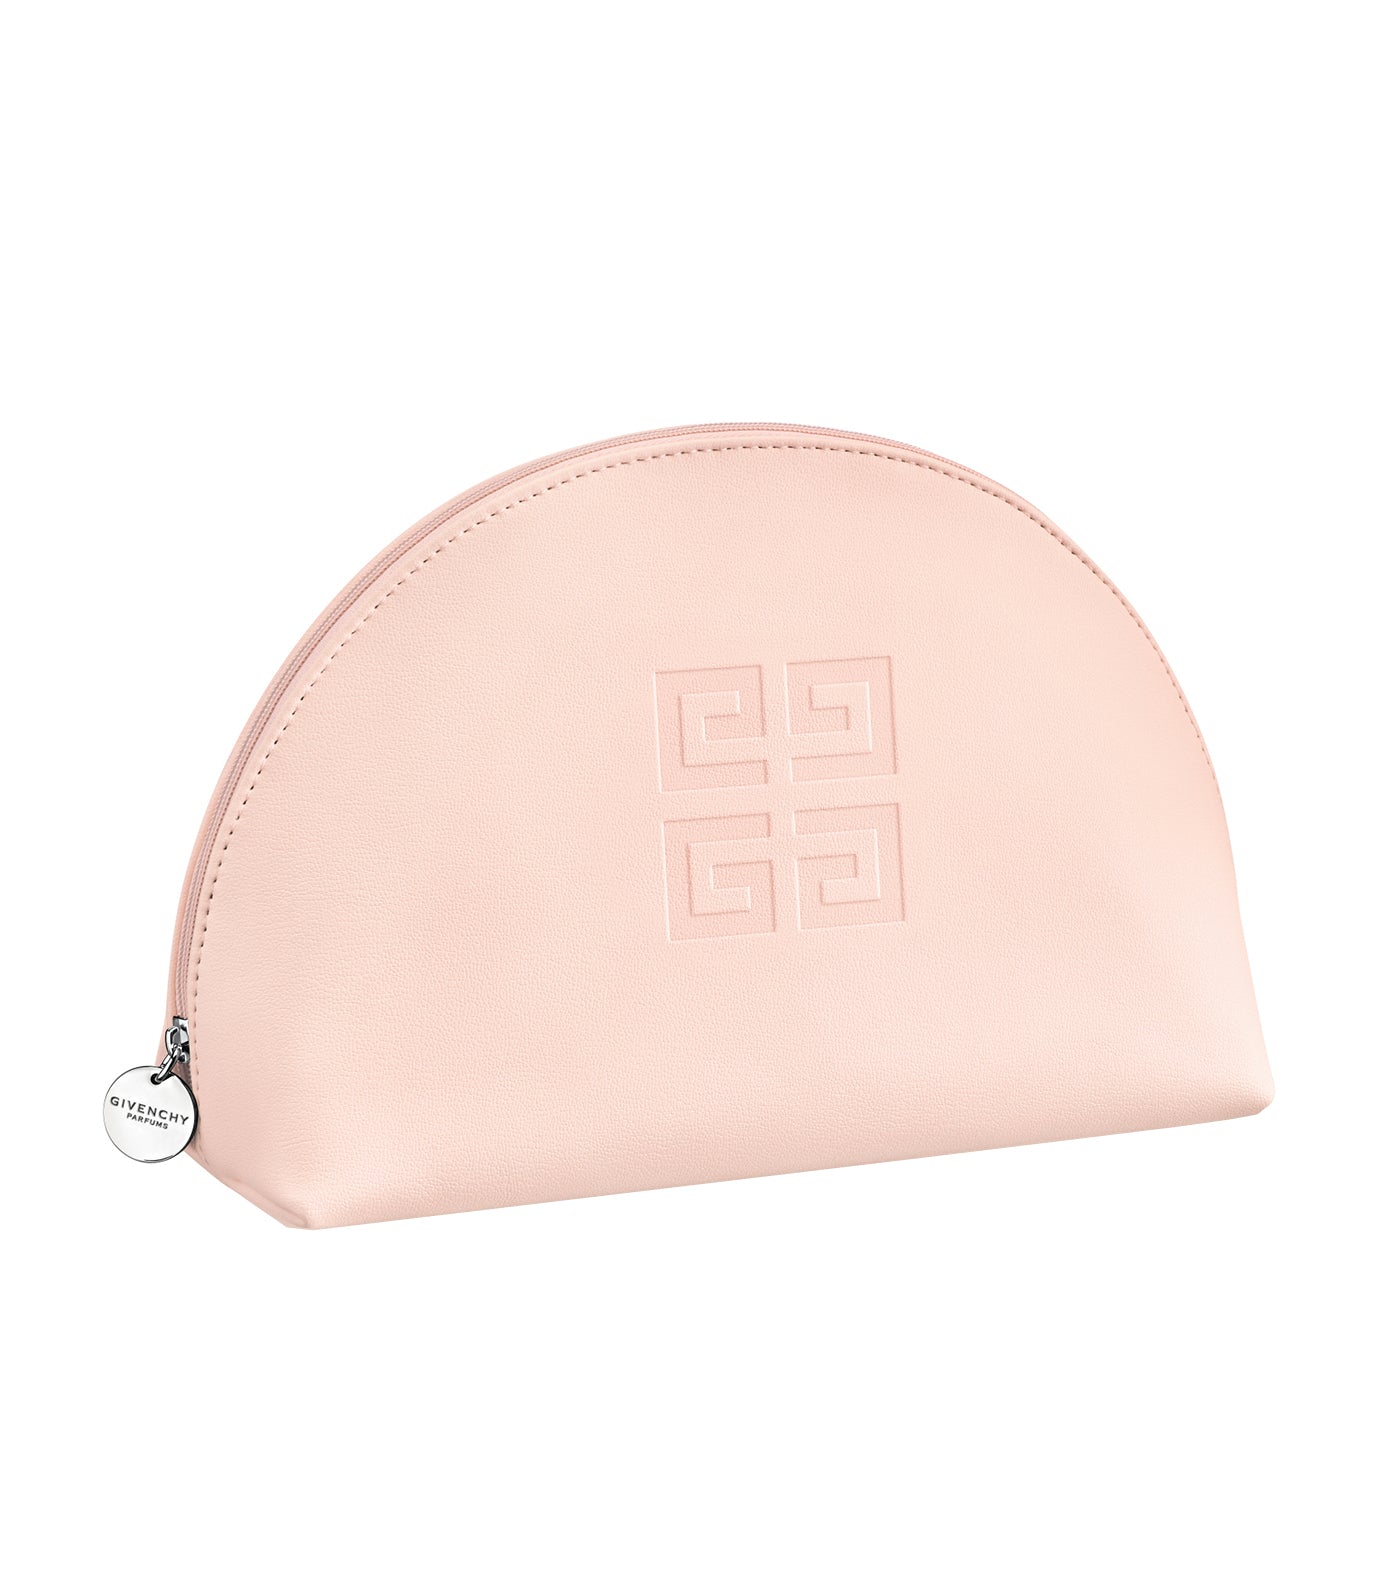 Free Givenchy Large Nude-colored Pouch by Parfums Givenchy